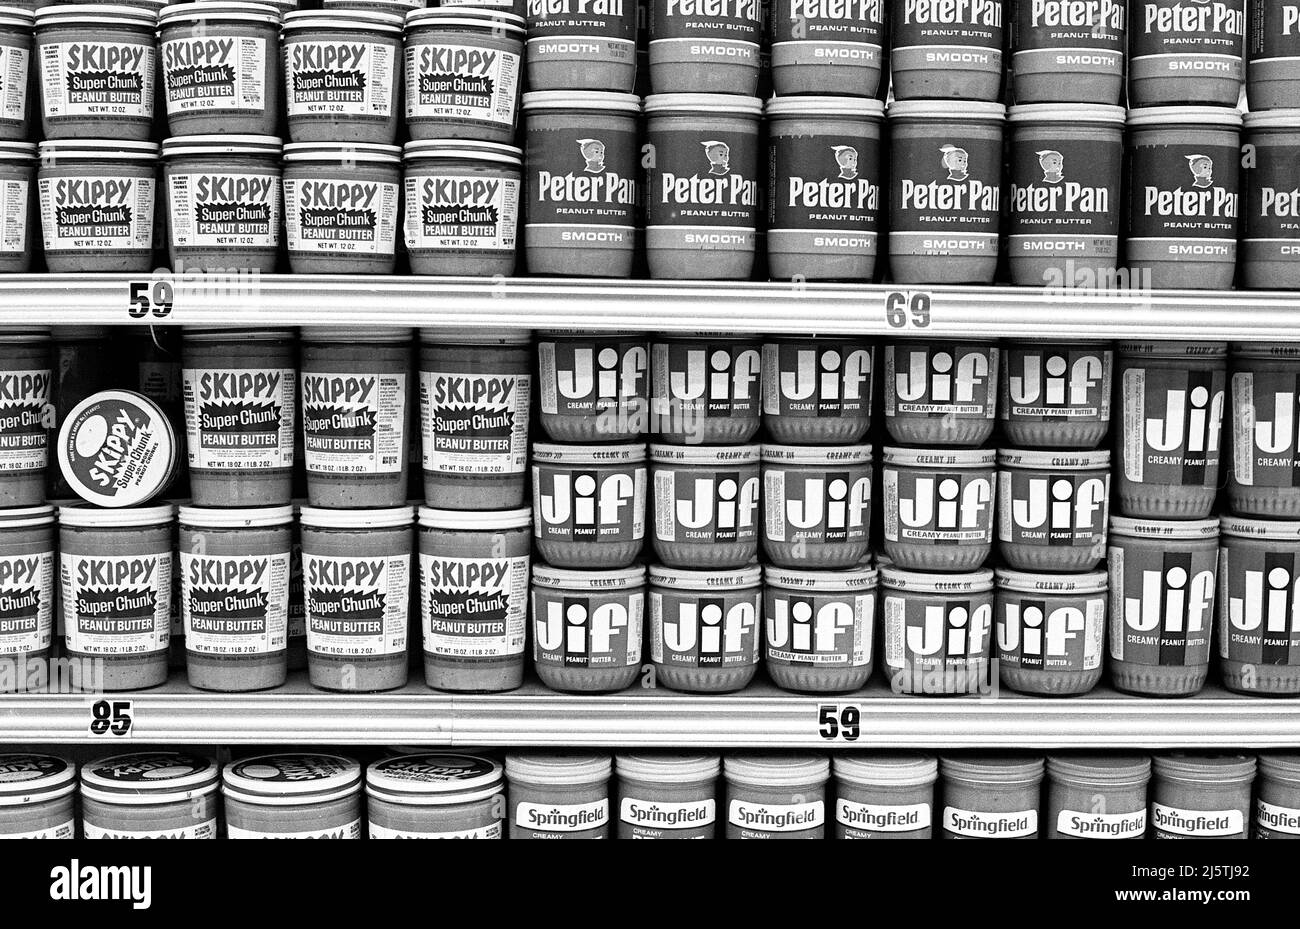 Classic brands of peanut butter on a shelf in supermarket circa 1970s. Stock Photo